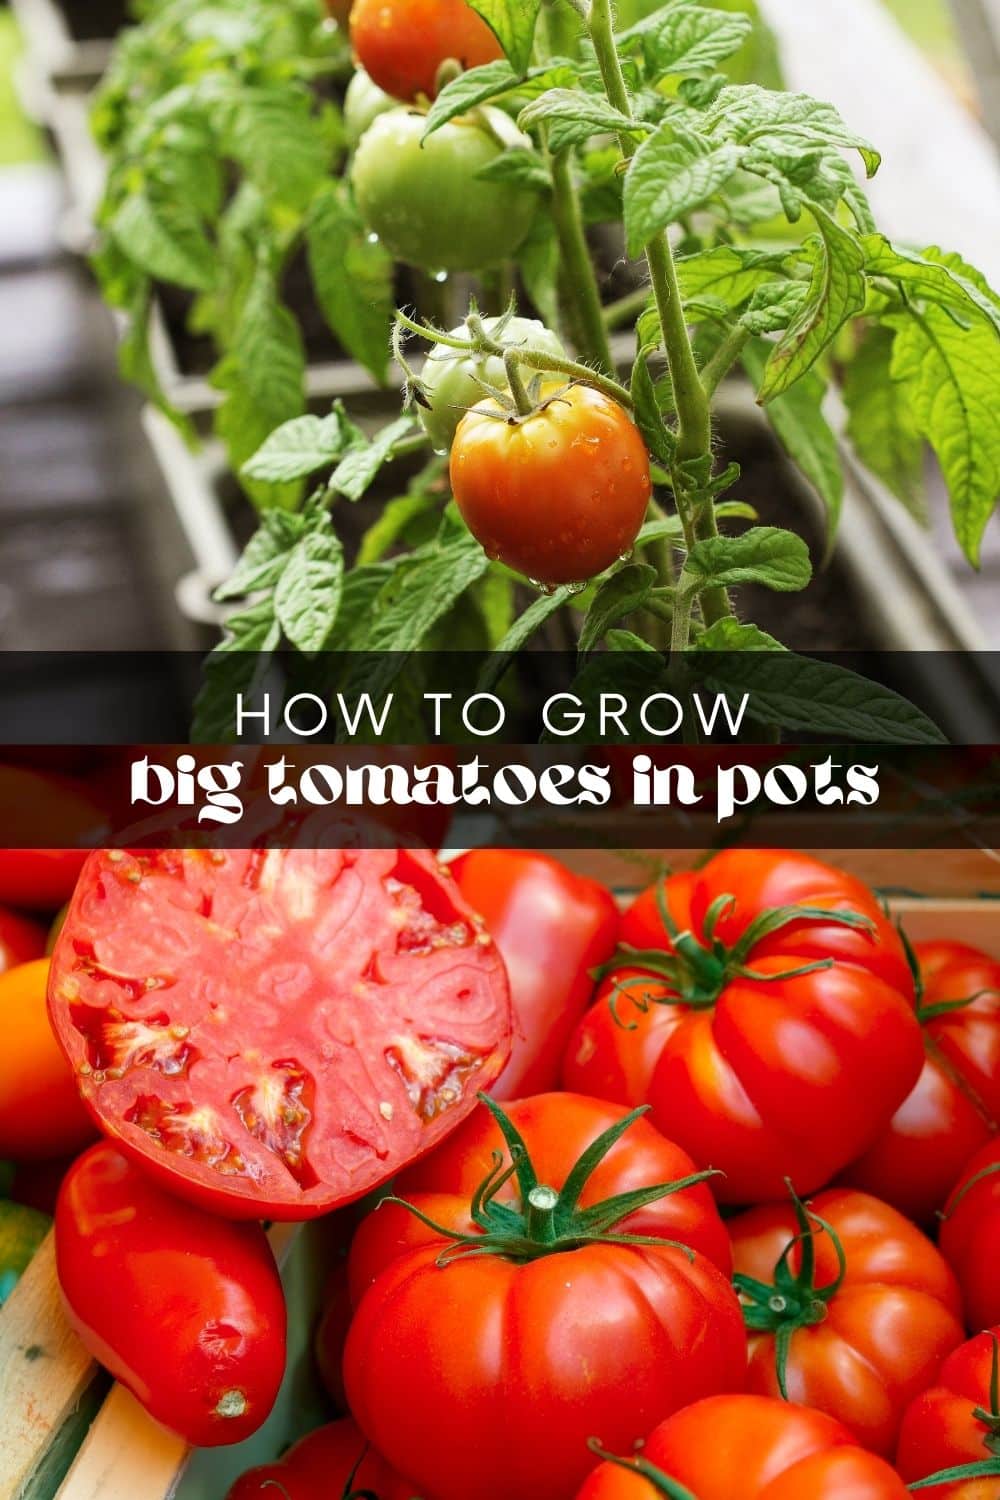 Tomatoes have to be top on the list for anyone starting a vegetable garden. They can be grown almost anywhere and come in various sizes, shapes, and colors. Big tomatoes make the best sandwiches and are perfect for canning! But did you know you can grow big tomatoes in pots? 